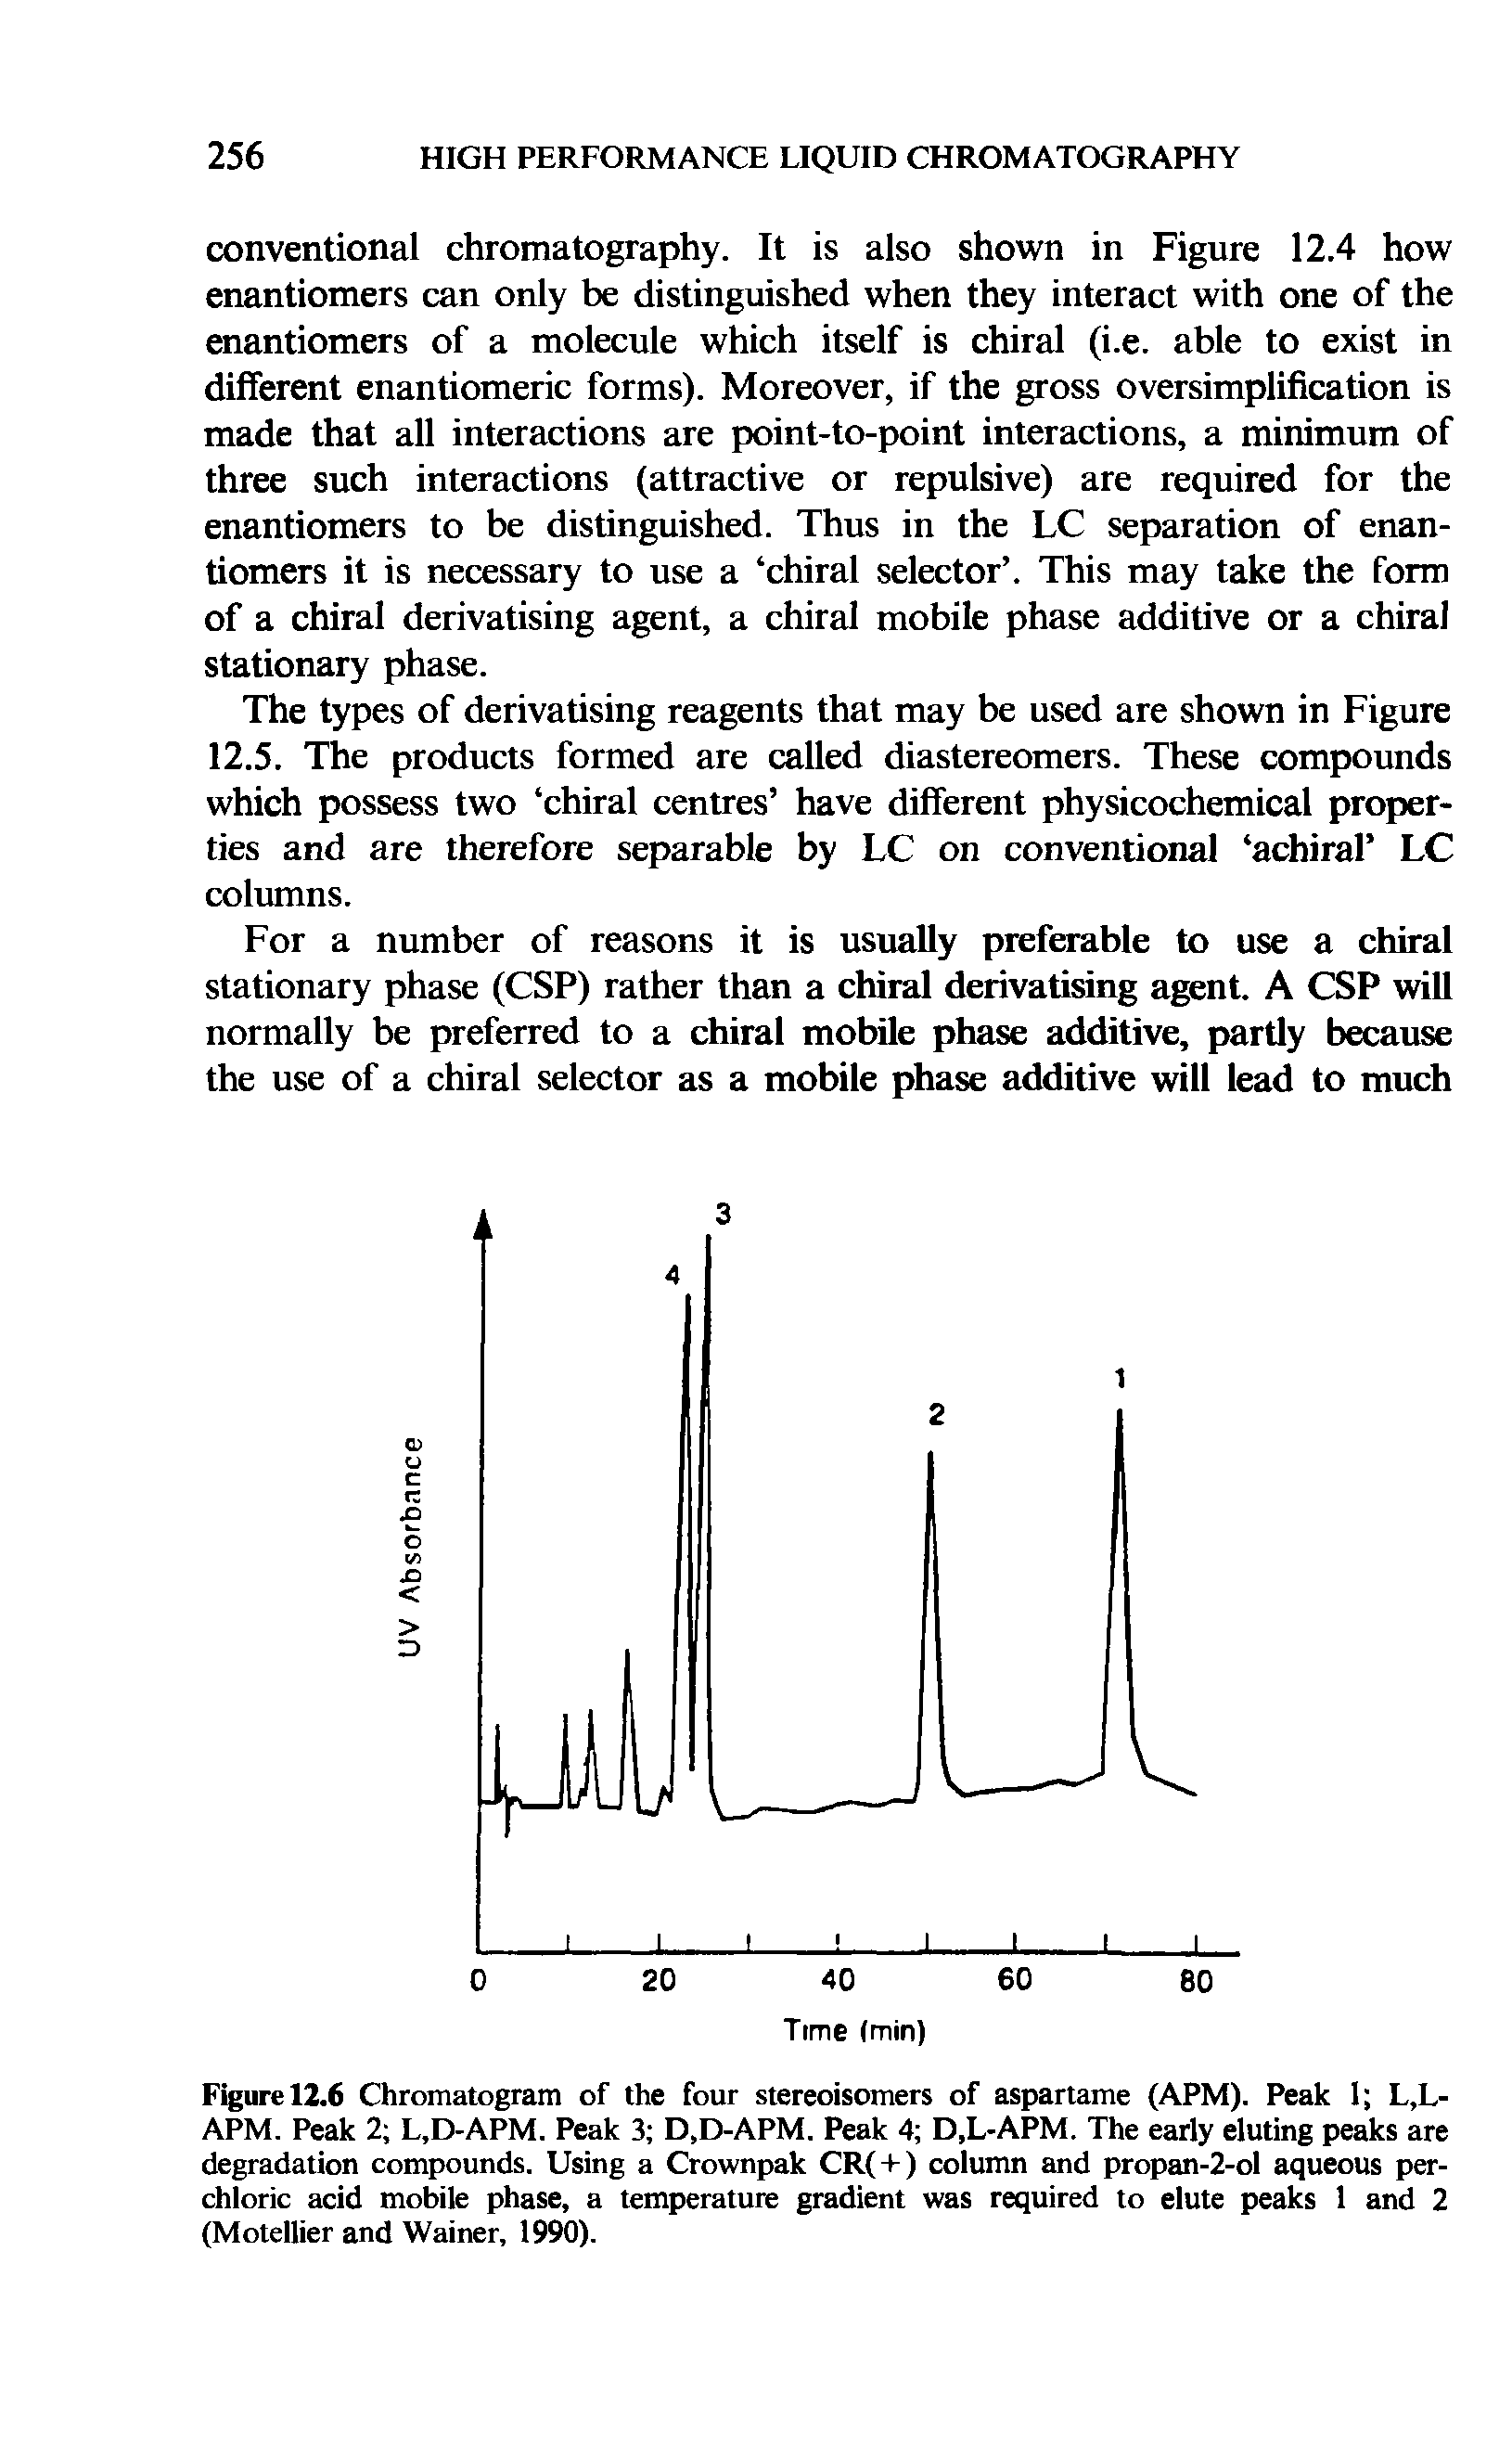 Figure 12.6 Chromatogram of the four stereoisomers of aspartame (APM). Peak 1 L,L-APM. Peak 2 L,D-APM. Peak 3 D.D-APM. Peak 4 D.L-APM. The early eluting peaks are degradation compounds. Using a Crownpak CR( + ) column and propan-2-ol aqueous perchloric acid mobile phase, a temperature gradient was required to elute peaks 1 and 2 (Motellier and Wainer, 1990).